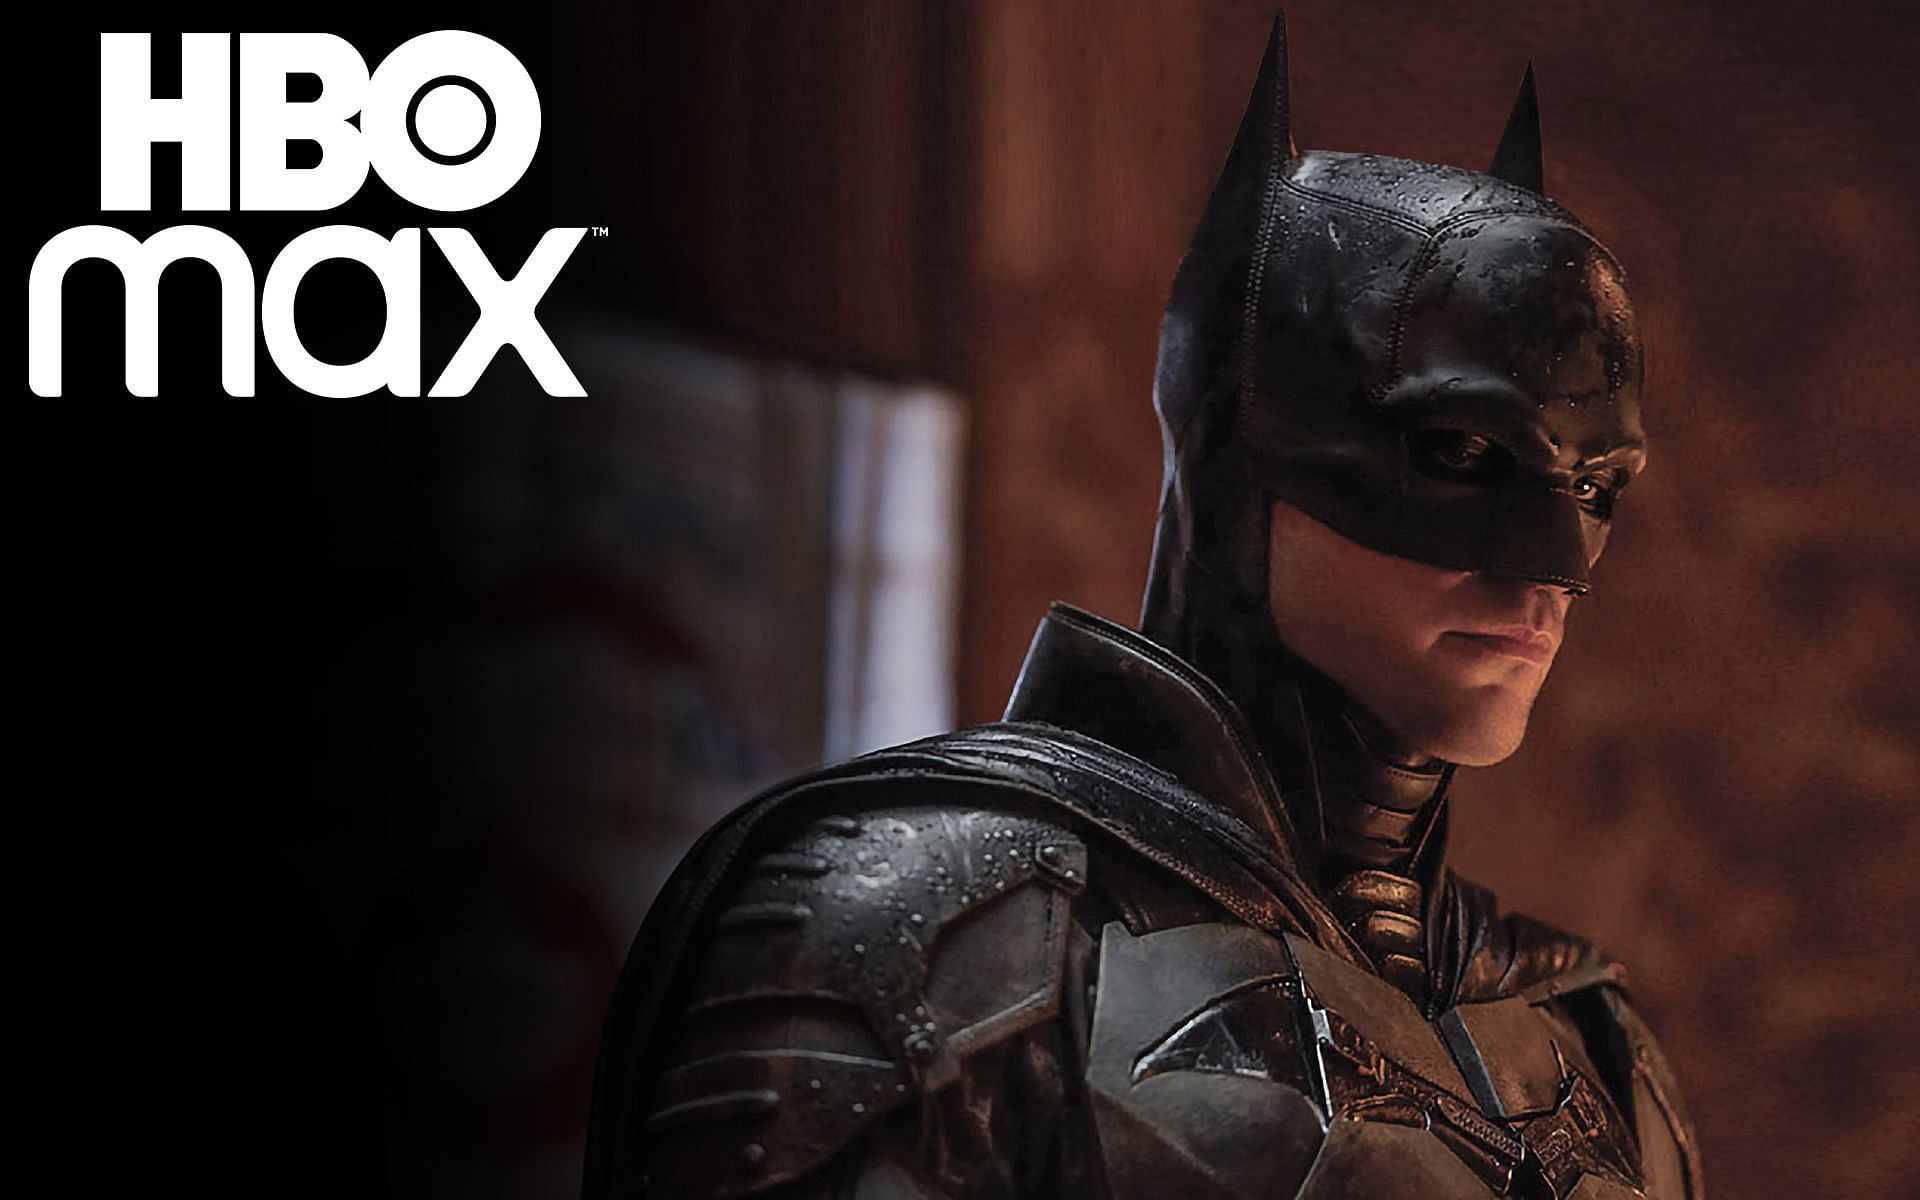 When will The Batman stream on HBO Max? Expected release date and more about the Robert Pattinson-starrer